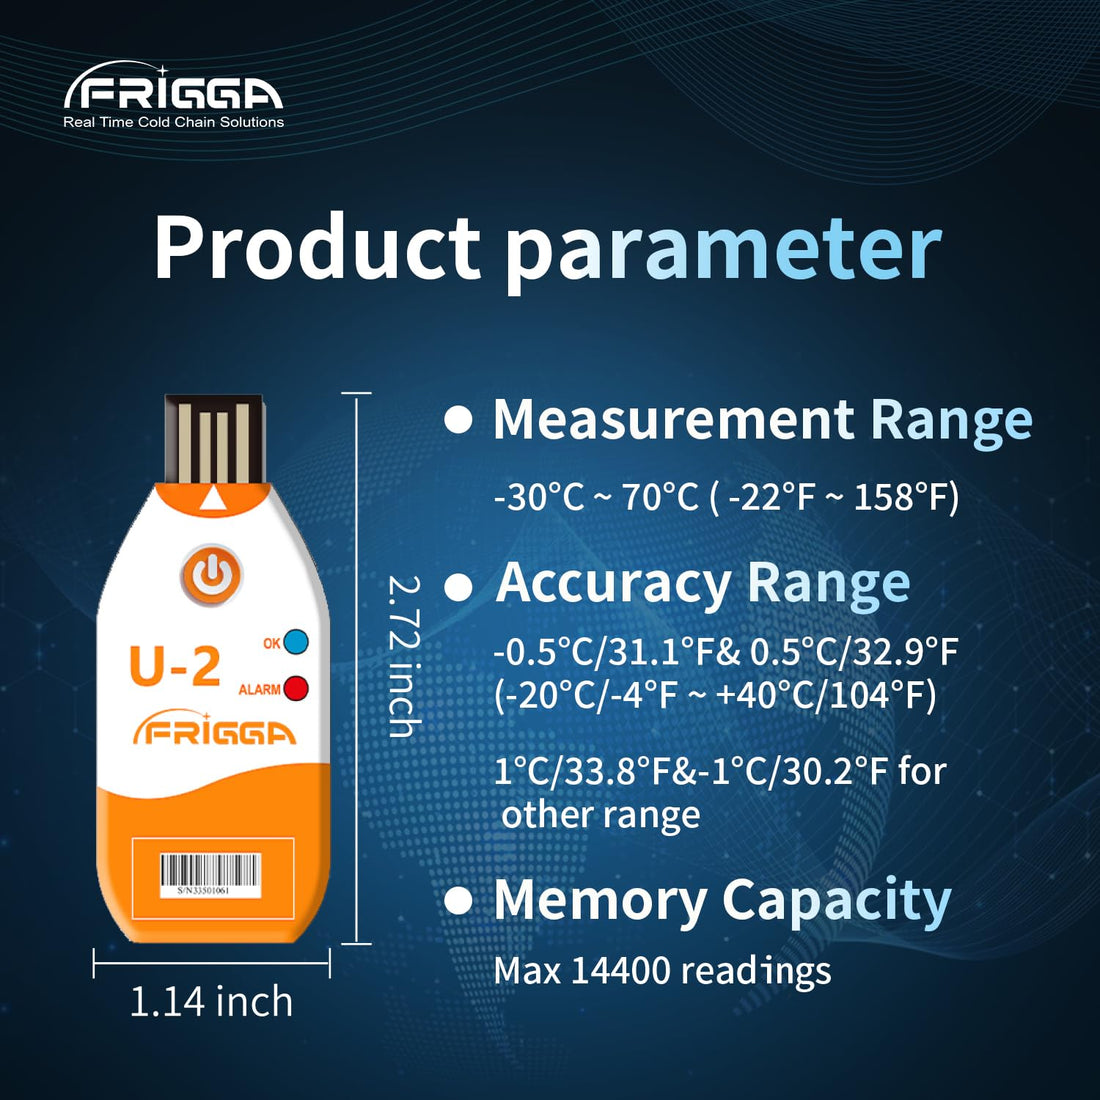 Frigga 10pcs USB Temperature Data Logger Single Use Temperature Recorder 100 Days High Accuracy Thermometer Monitor 14400 Points with PDF CSV Report,U2